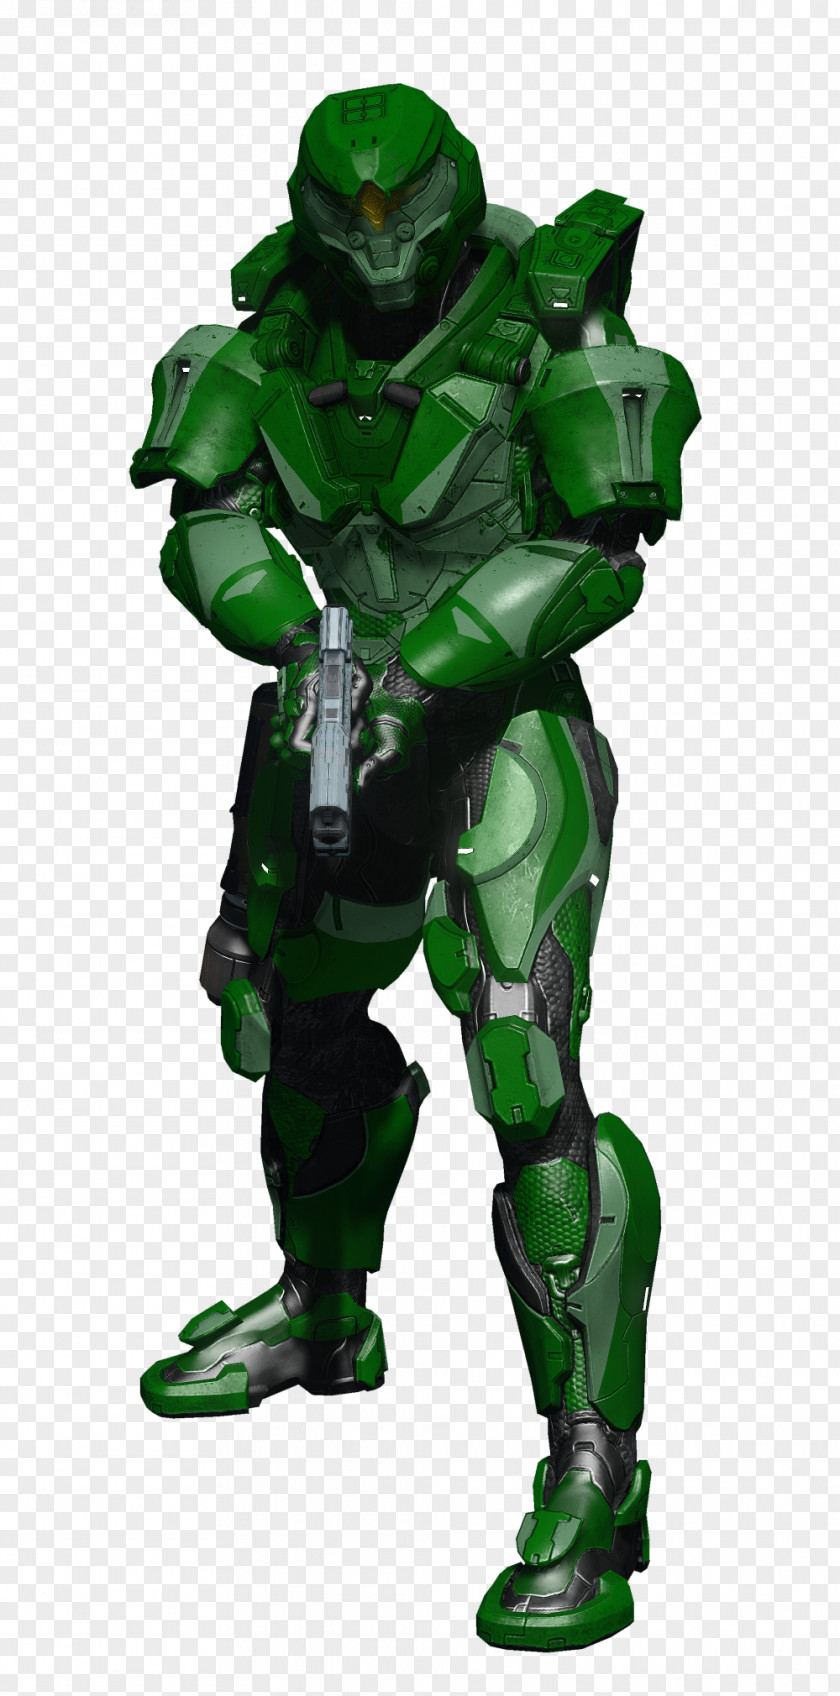 Halo 4 Halo: Reach Master Chief 3: ODST PNG